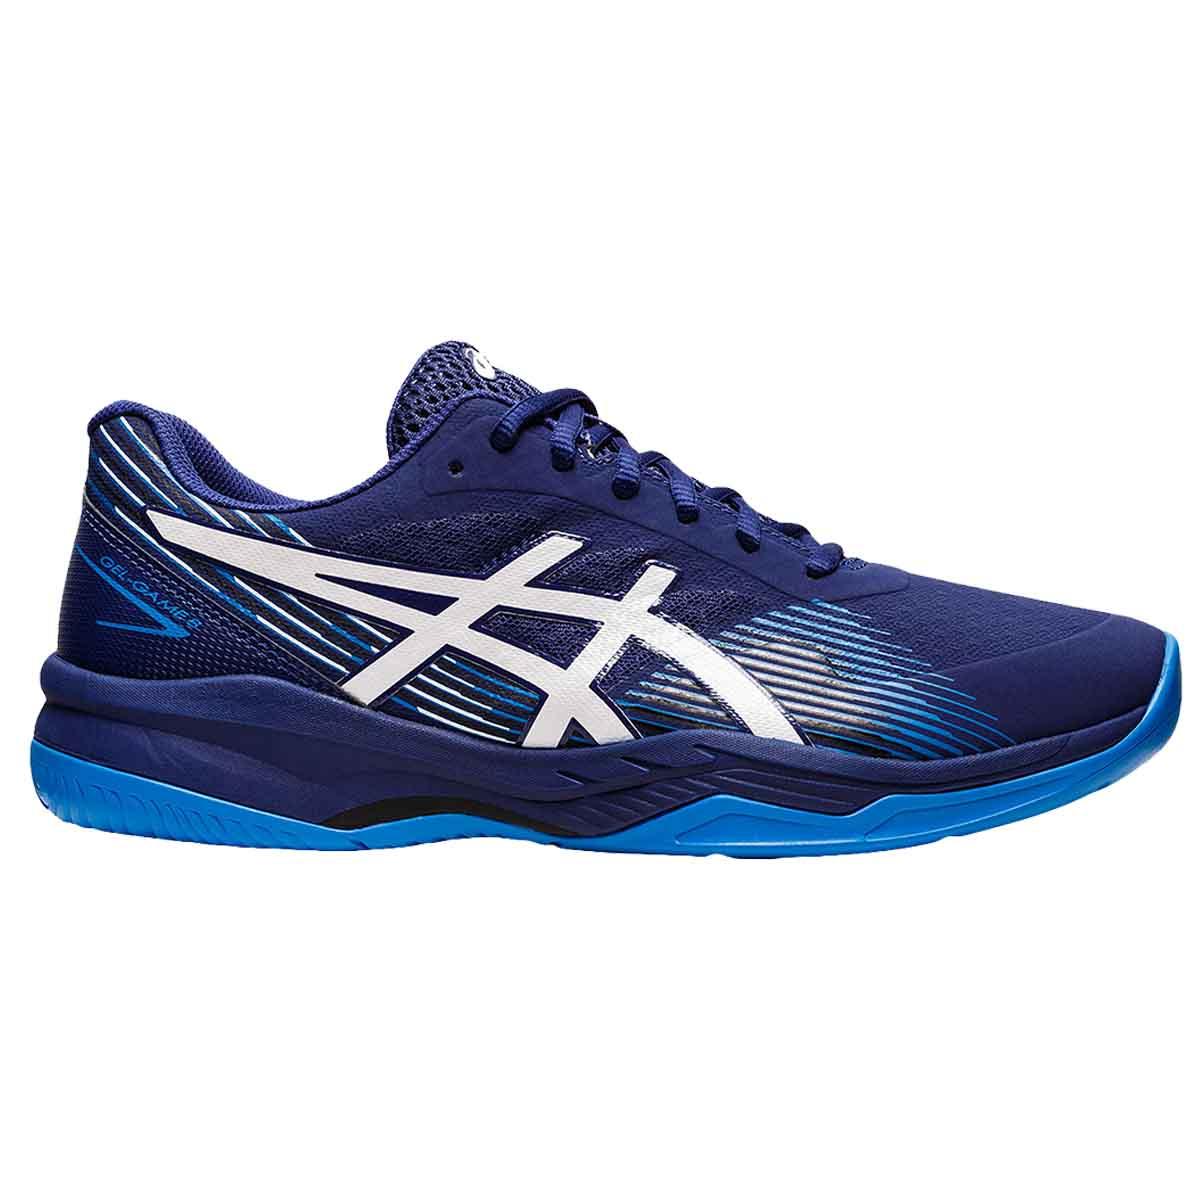 Buy Asics Gel-Game 8 Mens Tennis Shoes (Dive Blue/White) Online India